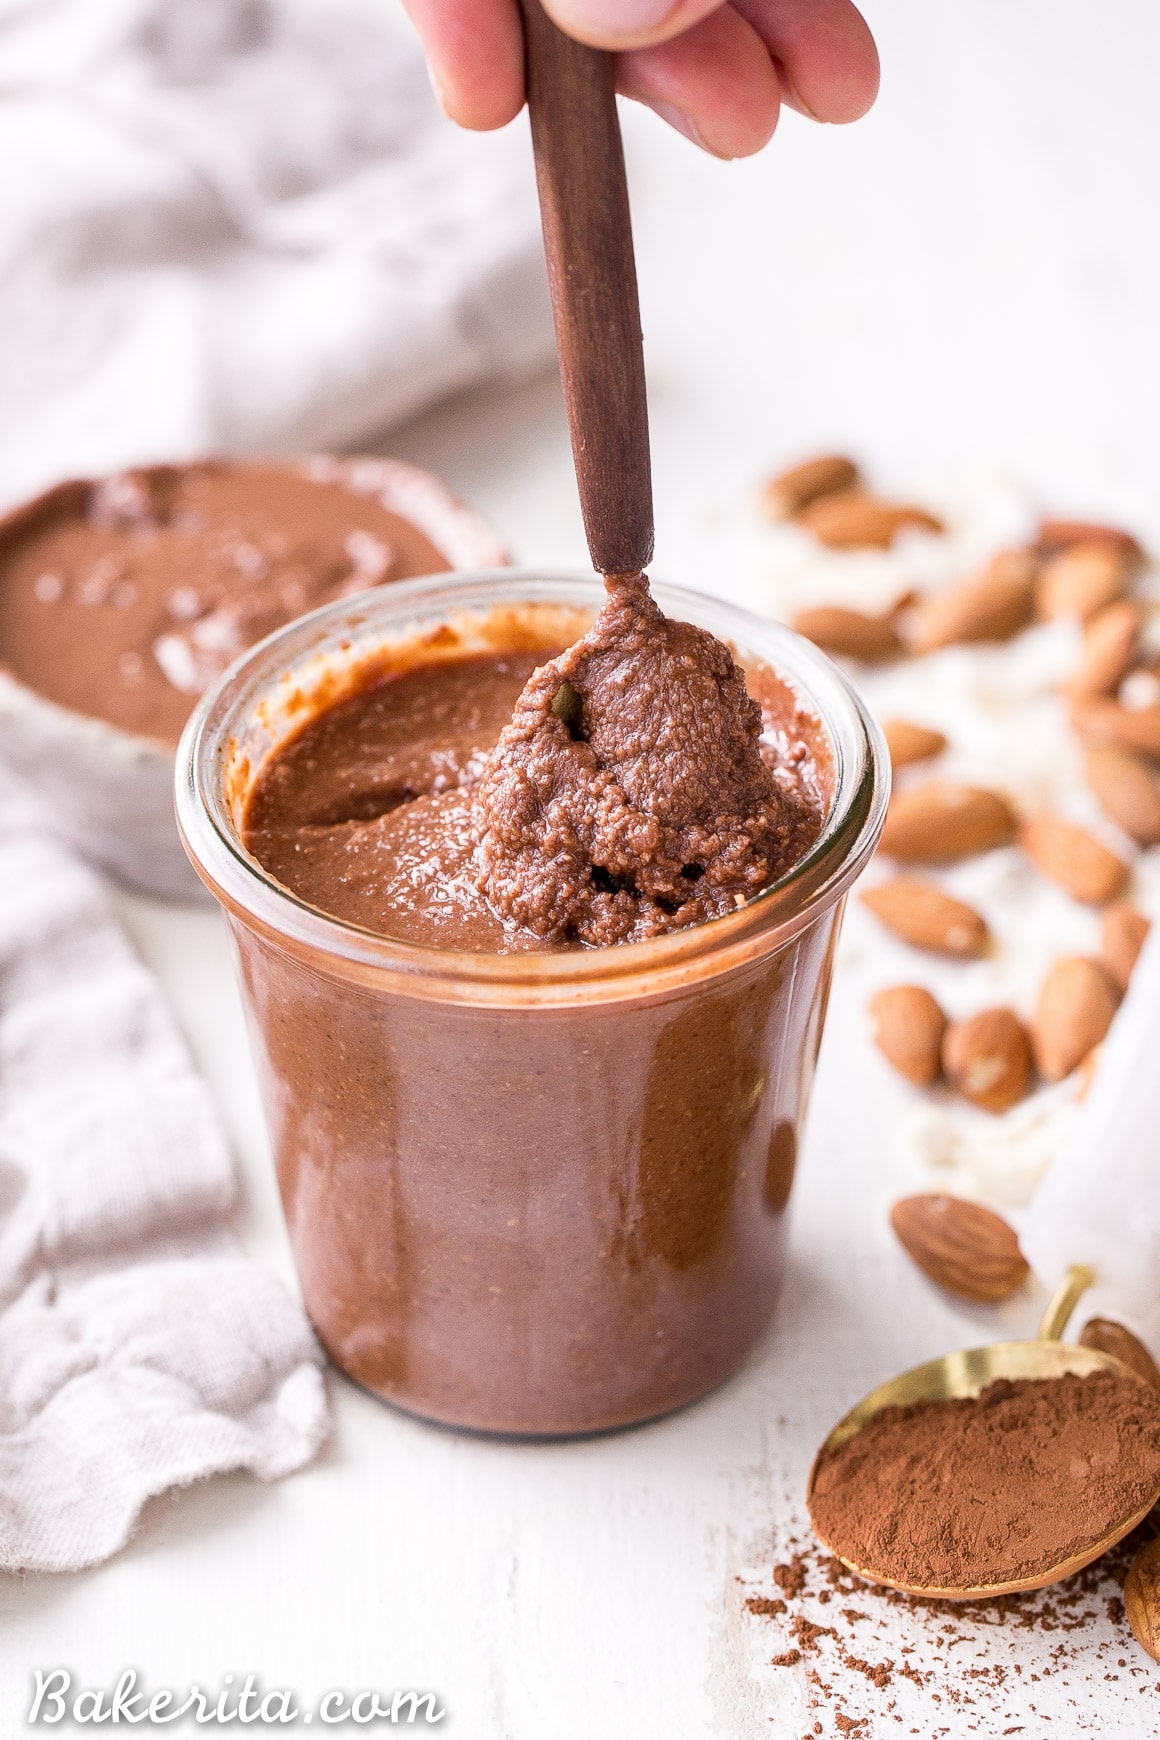 This Dark Chocolate Coconut Almond Butter is a decadent homemade nut butter that will satisfy all your chocolate cravings. This paleo and vegan chocolate spread is perfect with bananas, apples, oatmeal, or with a spoon!